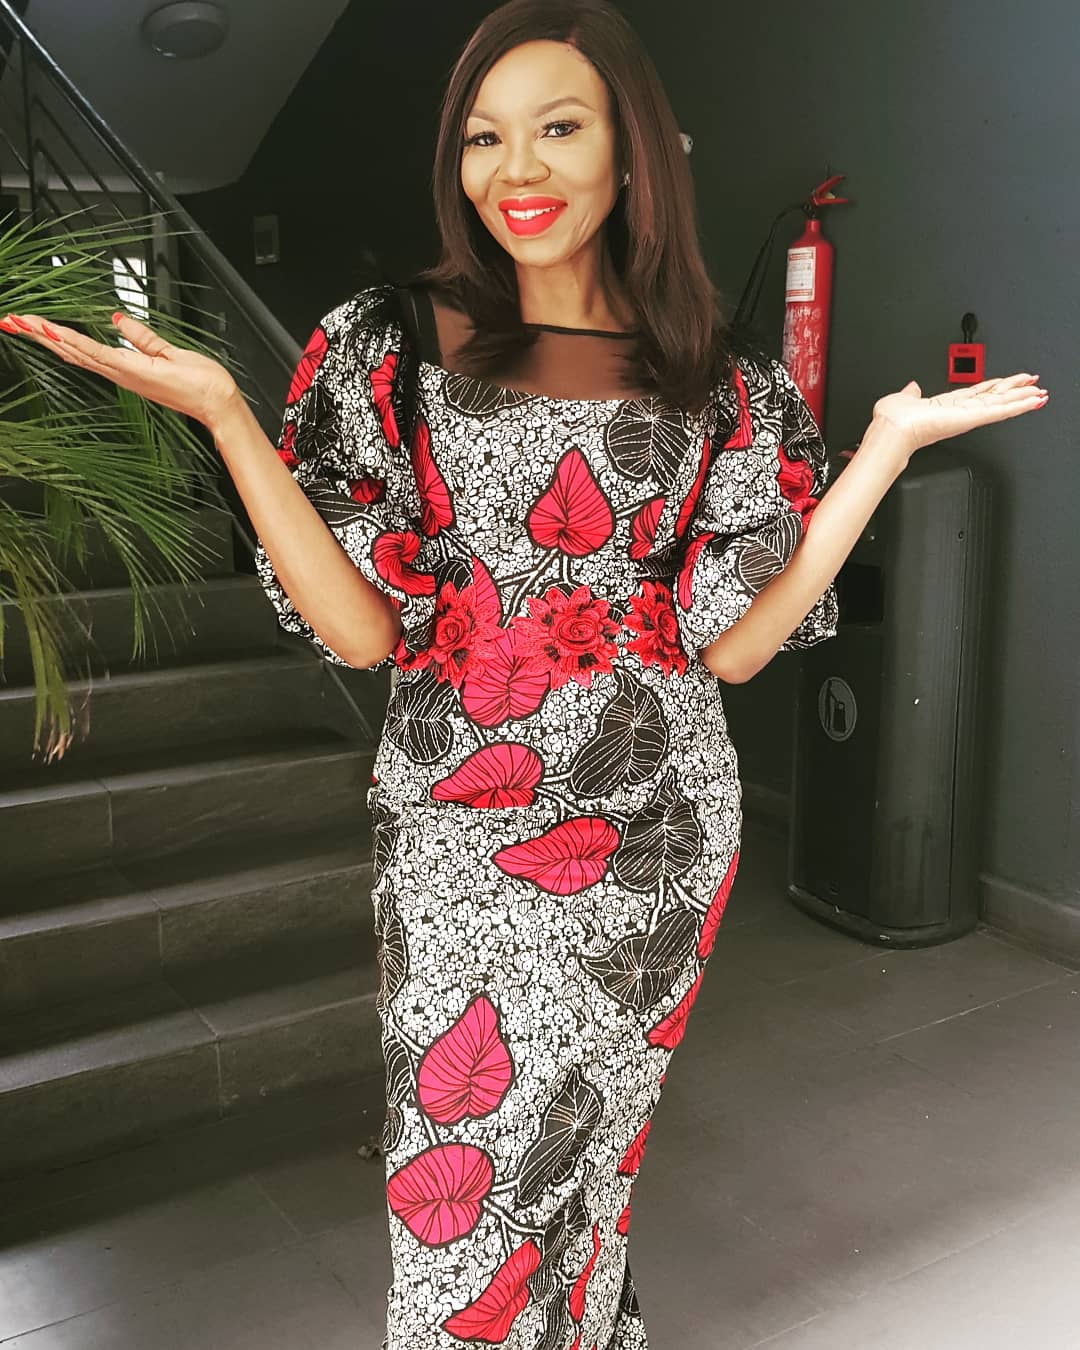 Betty Irabor: Whenever you wake up is your morning!